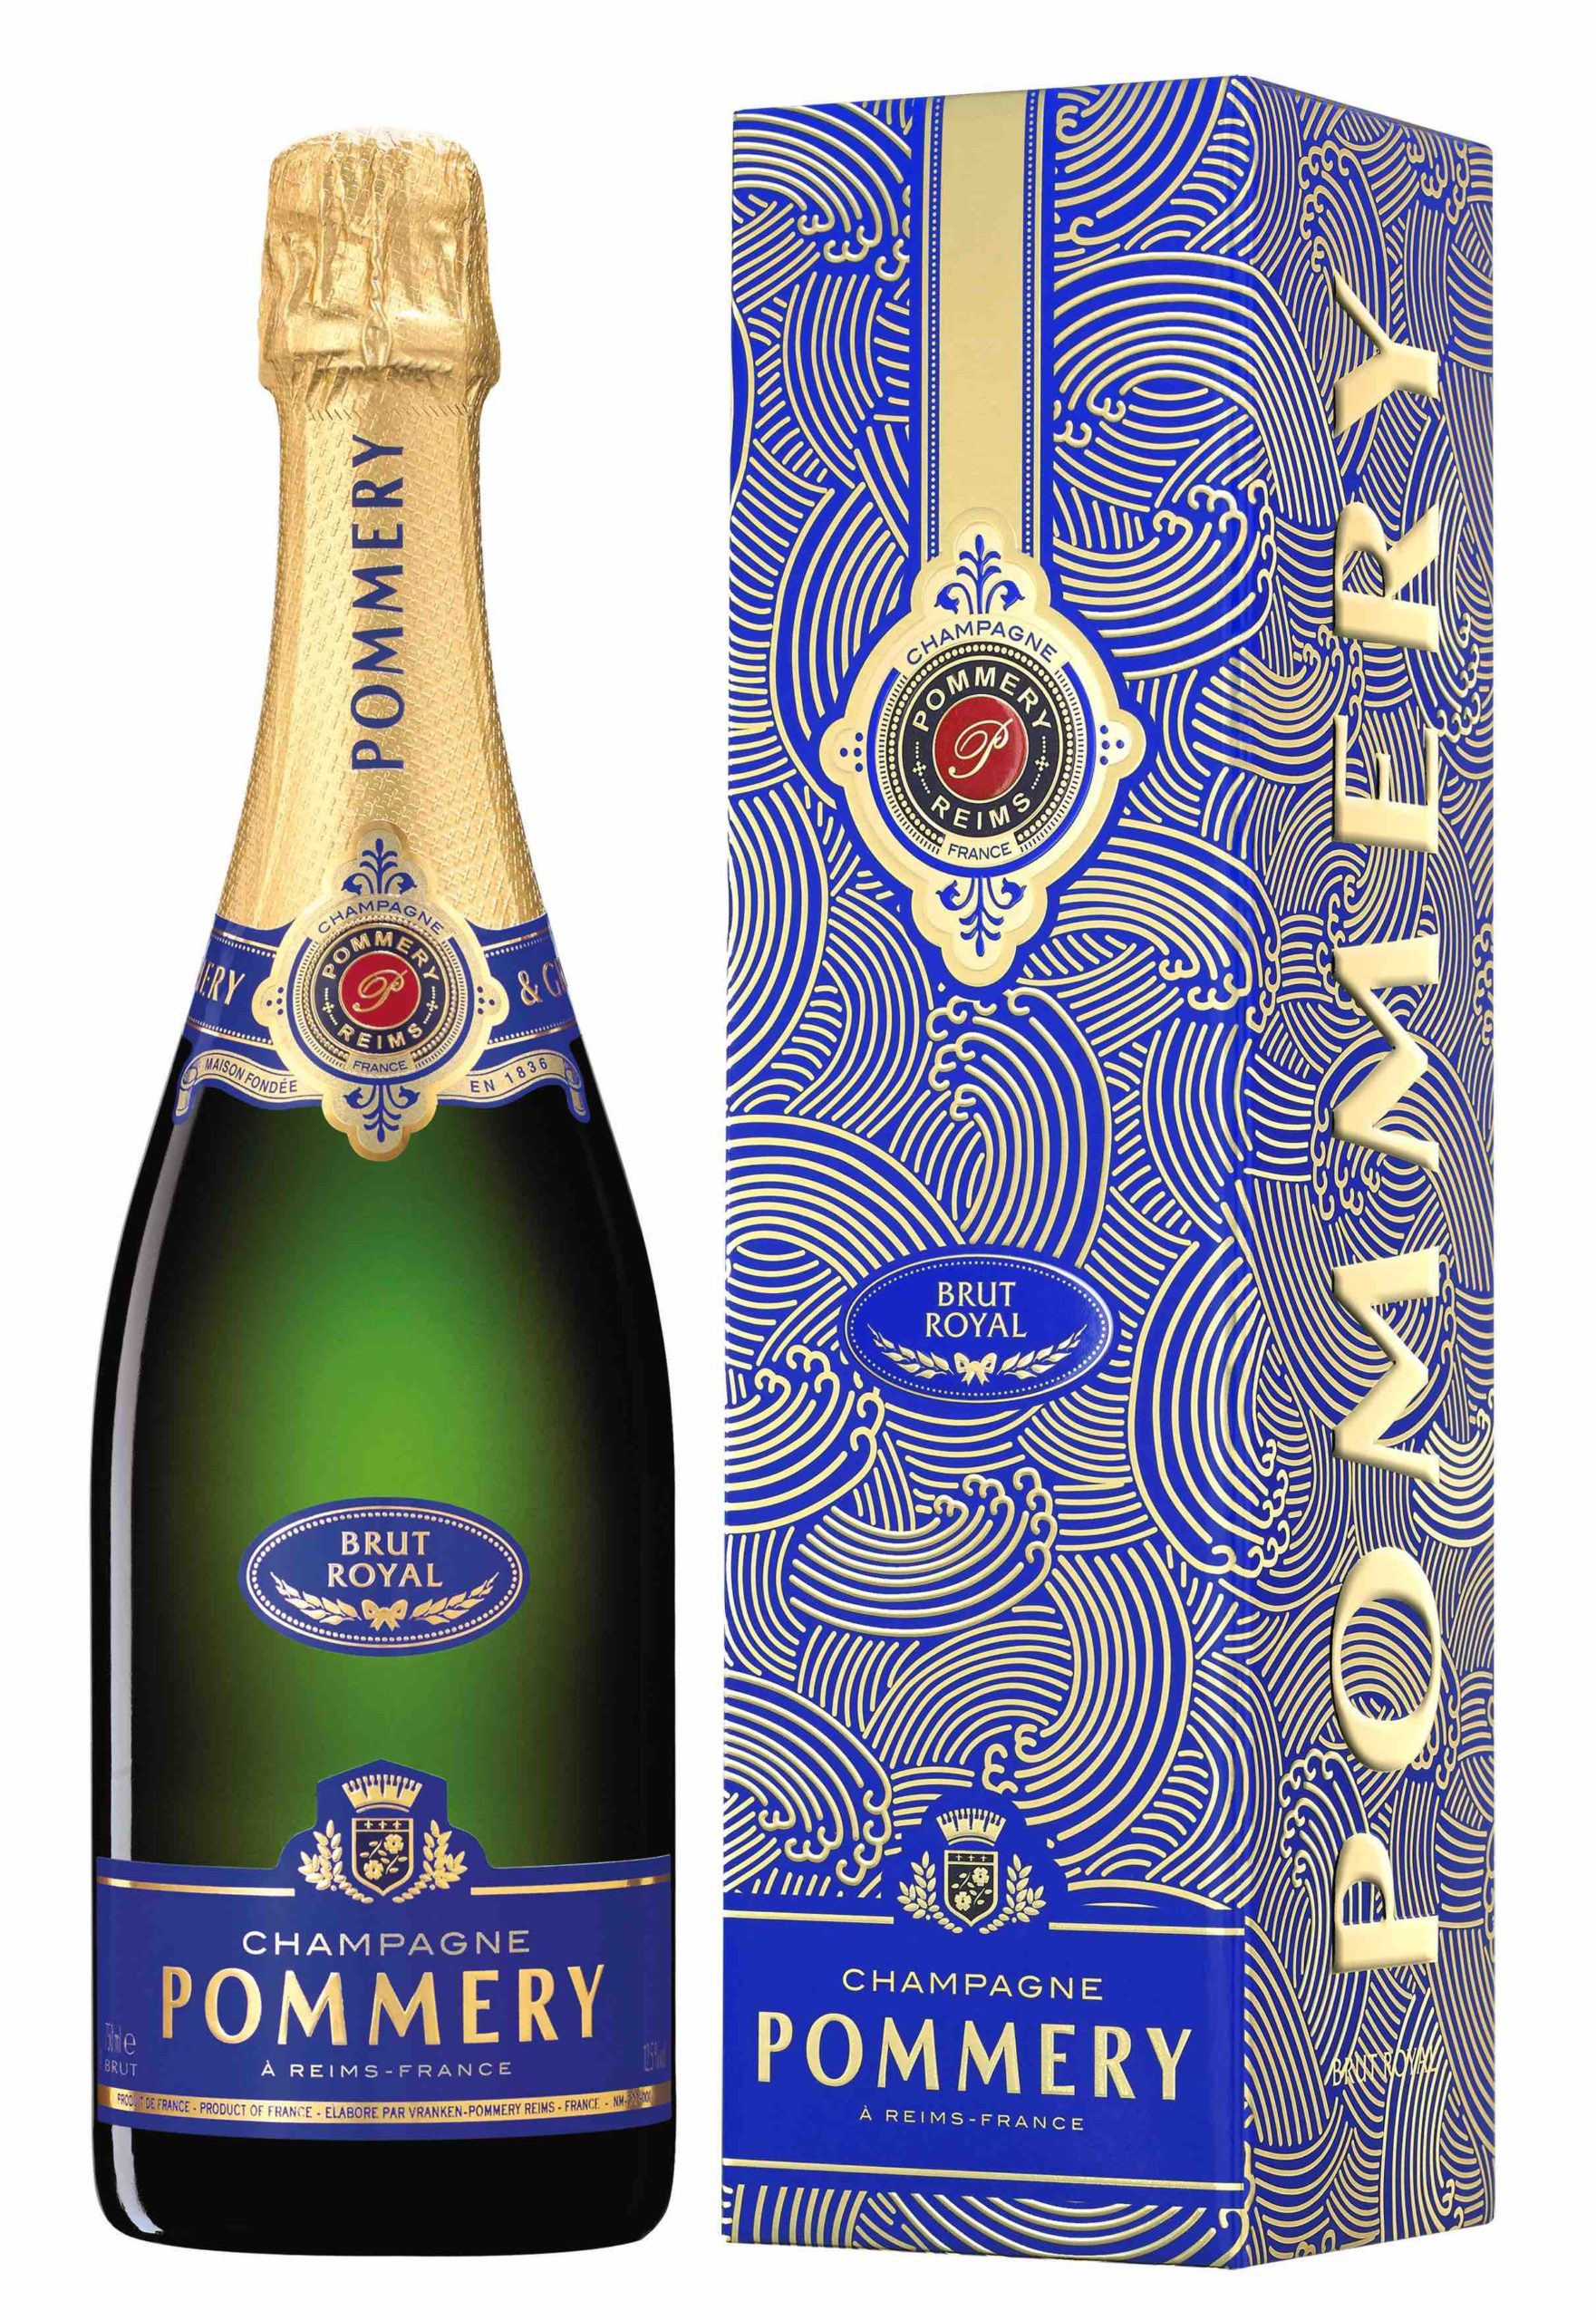 Celebrate New Year’s With These Champagne And Sparkling Wines